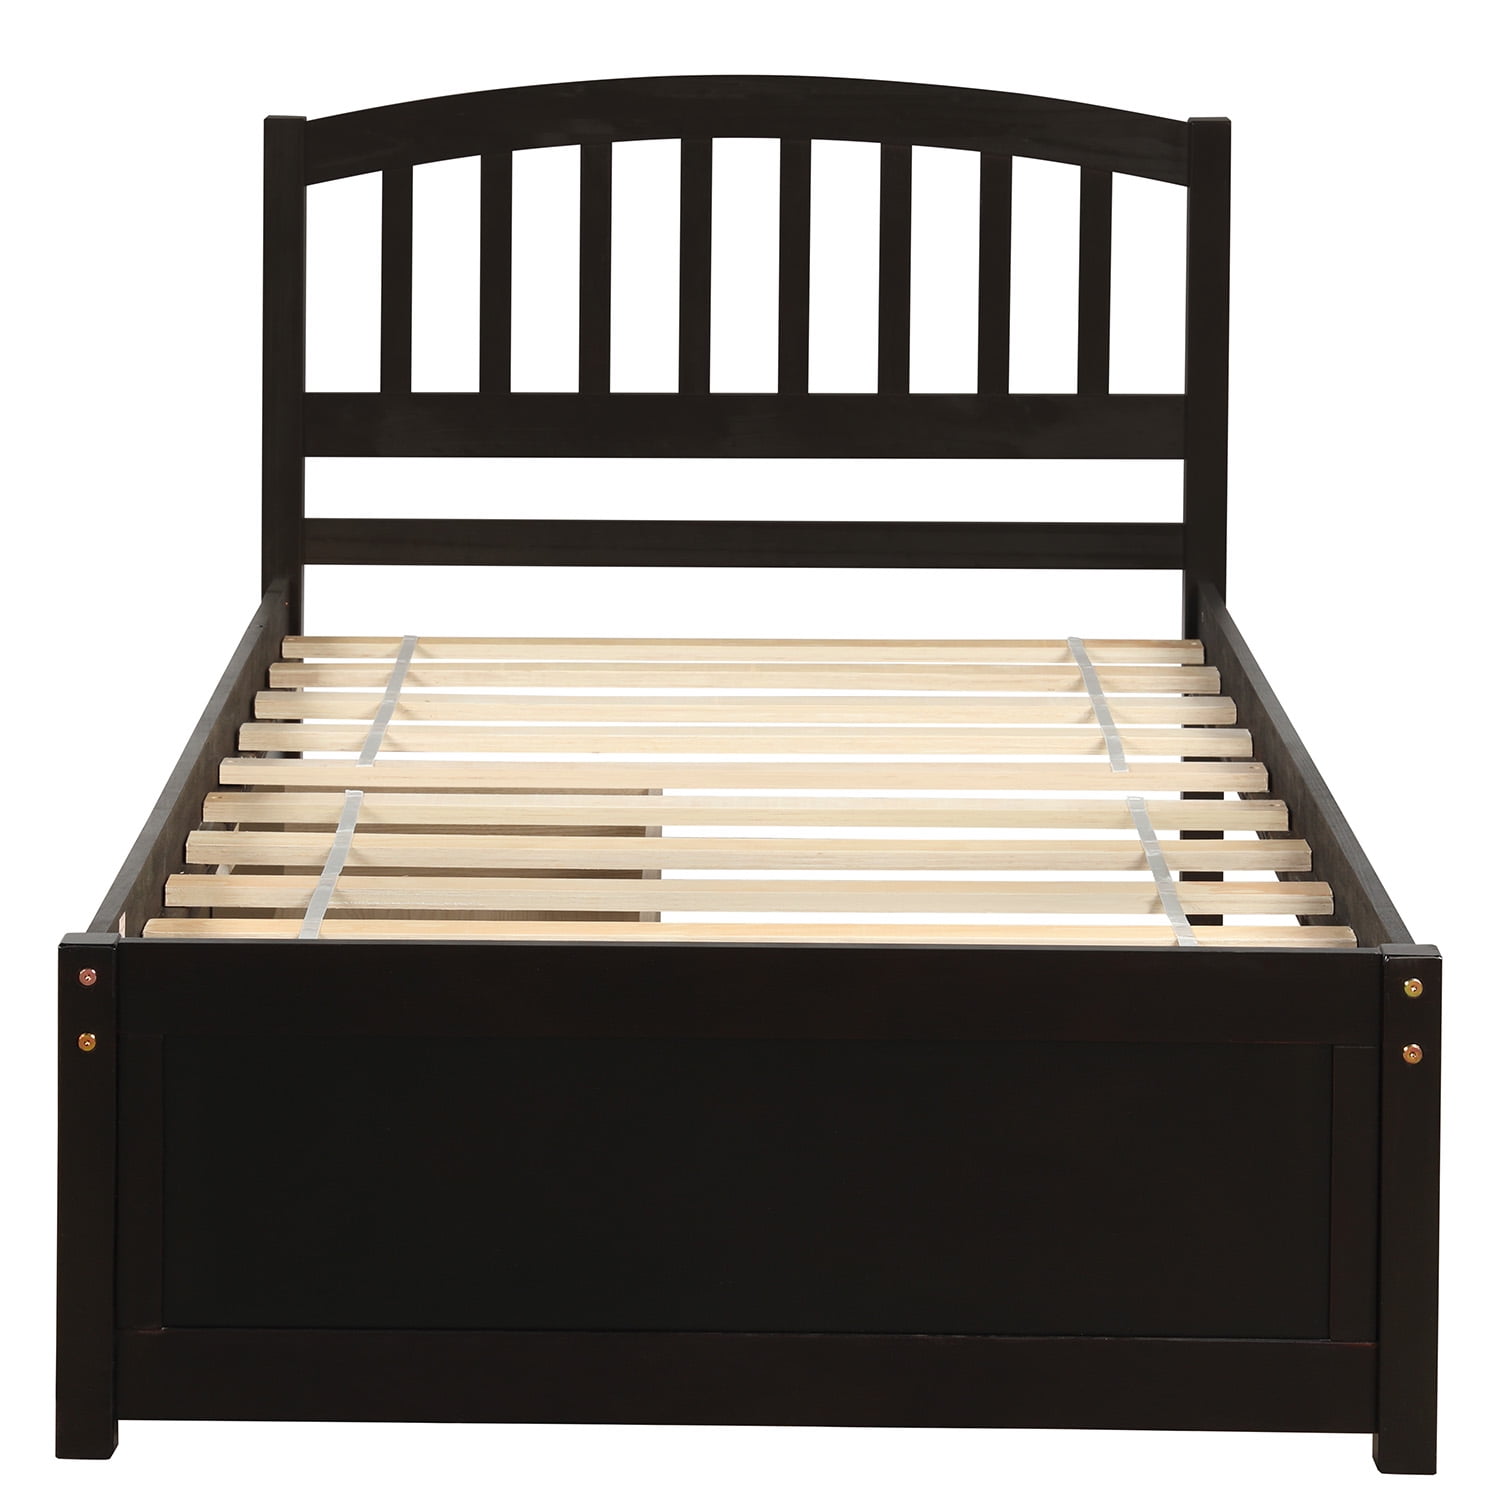 Solid Wood Captains Bed Frame Twin, Used Twin Captains Bed